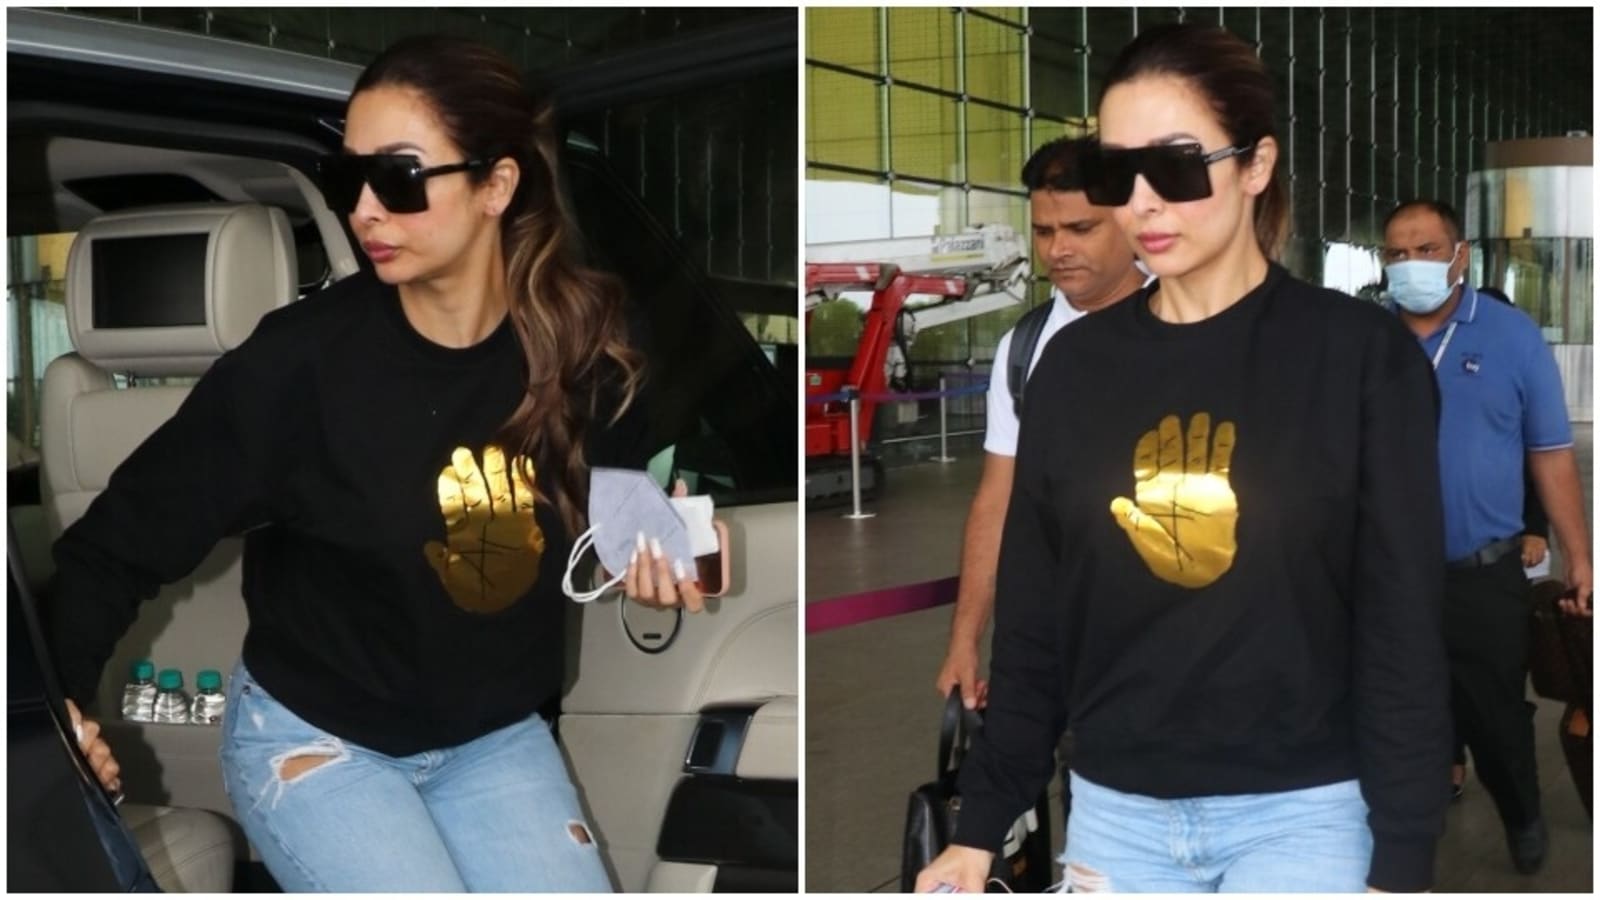 Malaika Arora is the boss lady of airport fashion in sweatshirt, distressed jeans and bare face: All pics